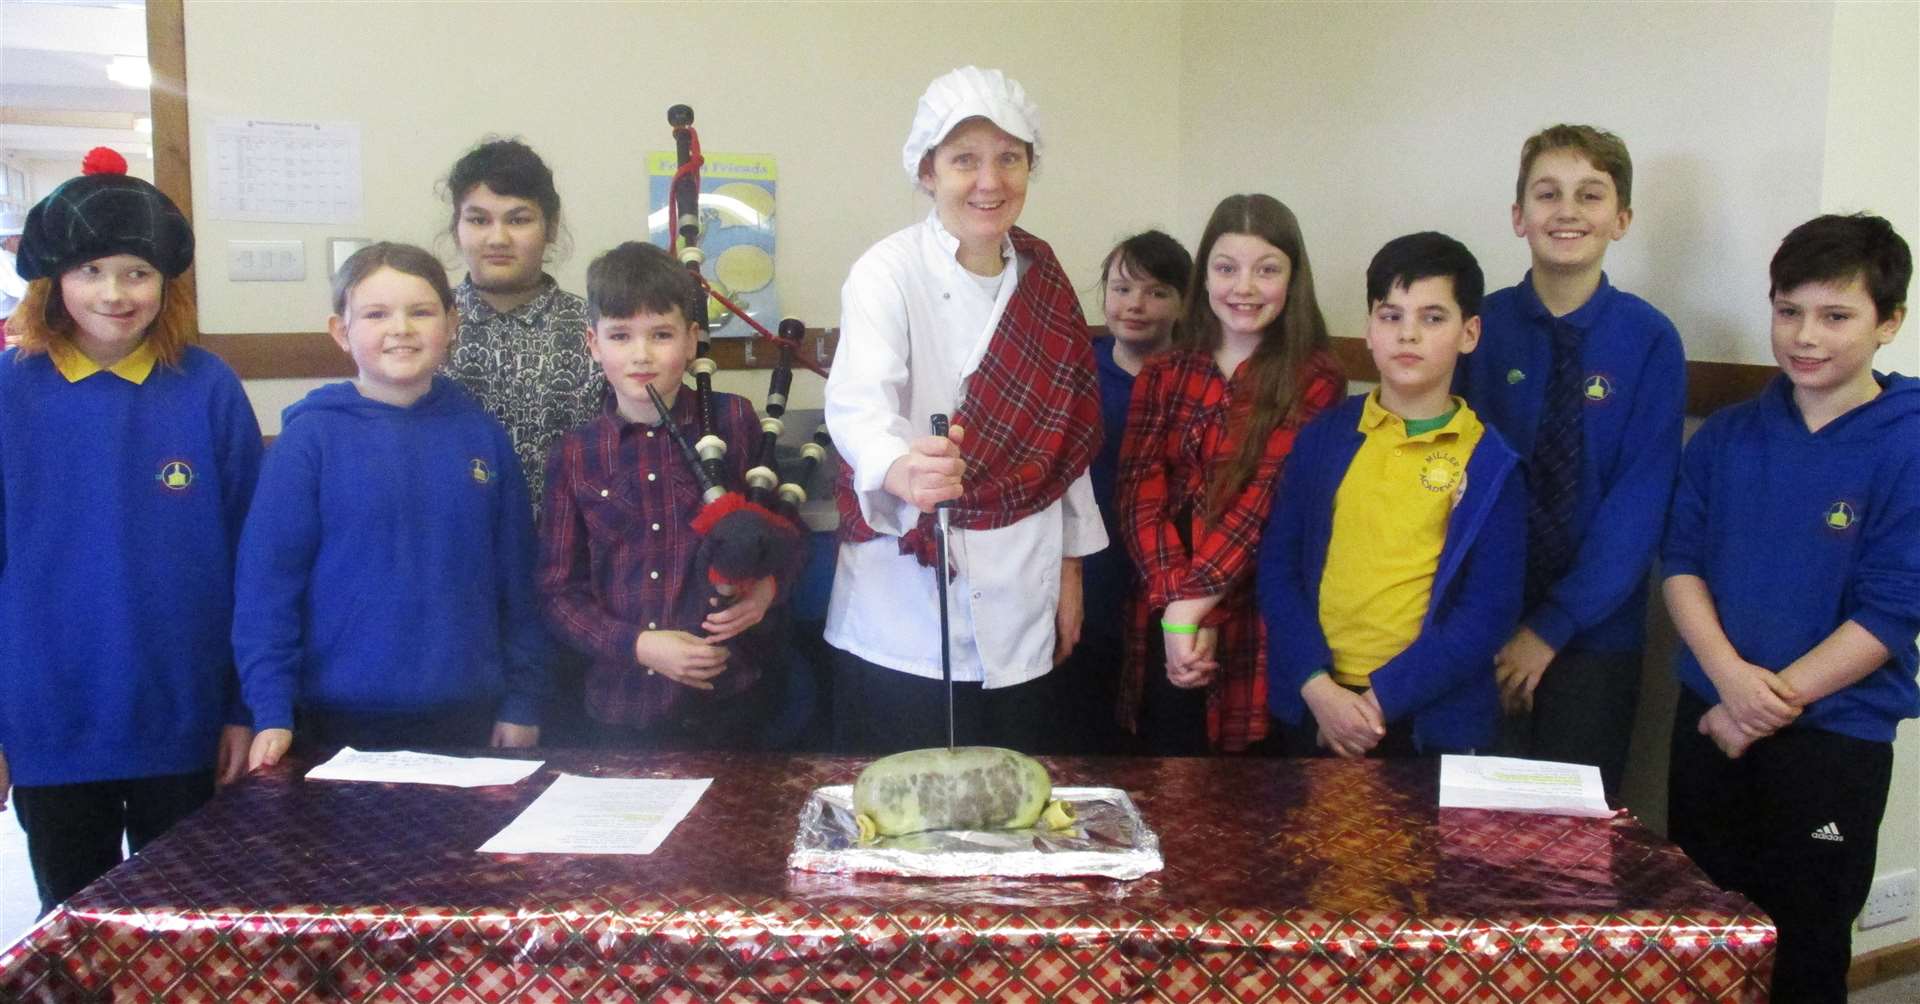 Miller’s cook Roseanda Miller with the children who recited the Address to a Haggis, along with the piper.